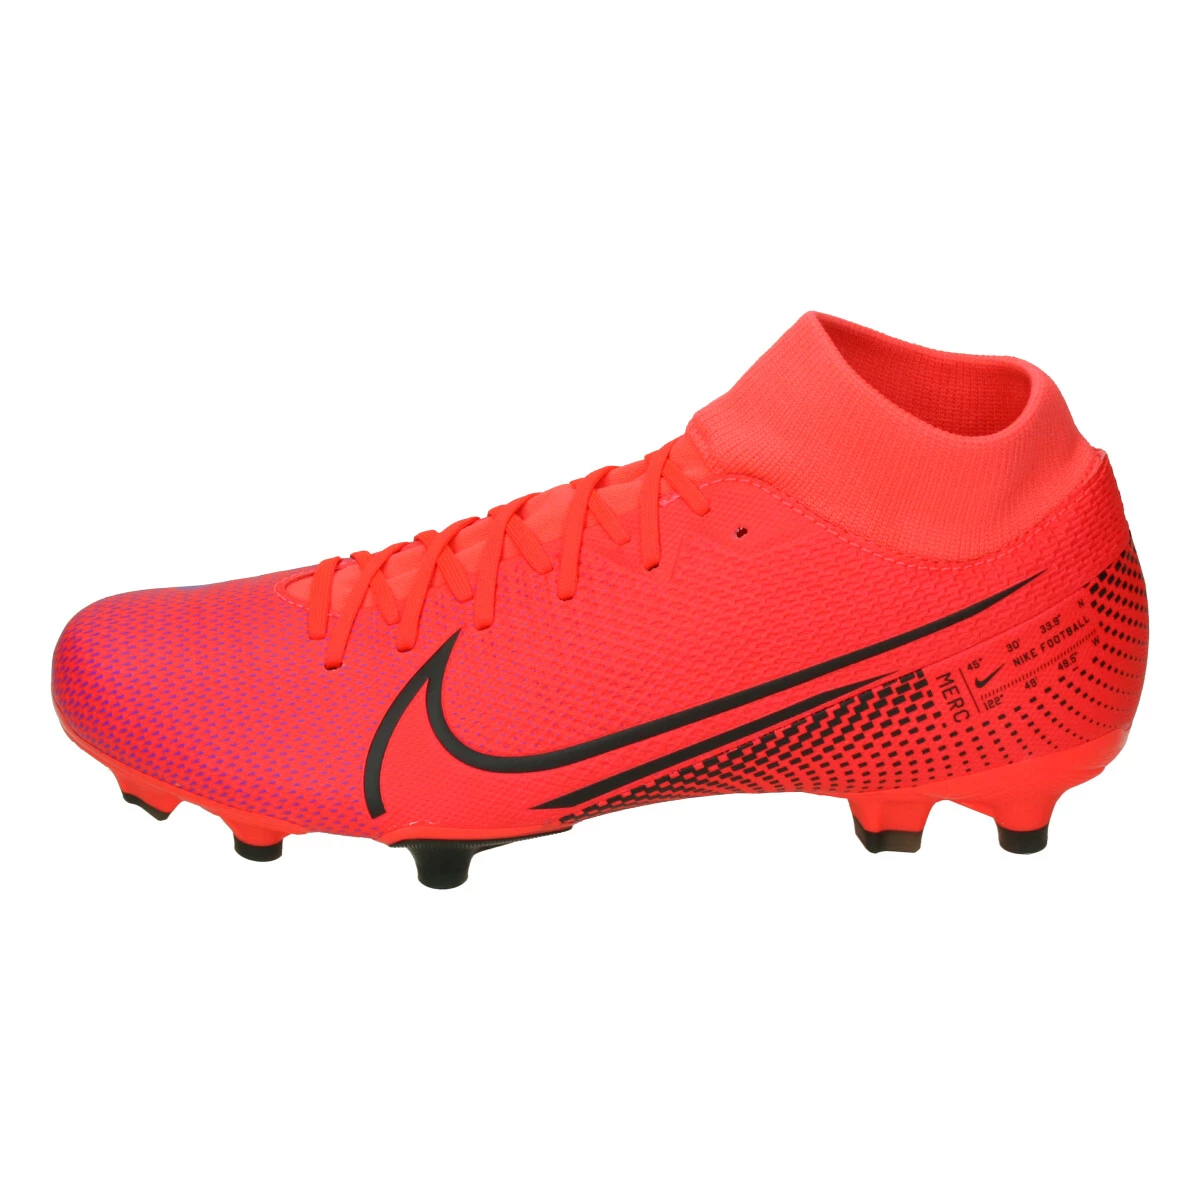 Nike Mercurial Superfly 7 Academy Mds 